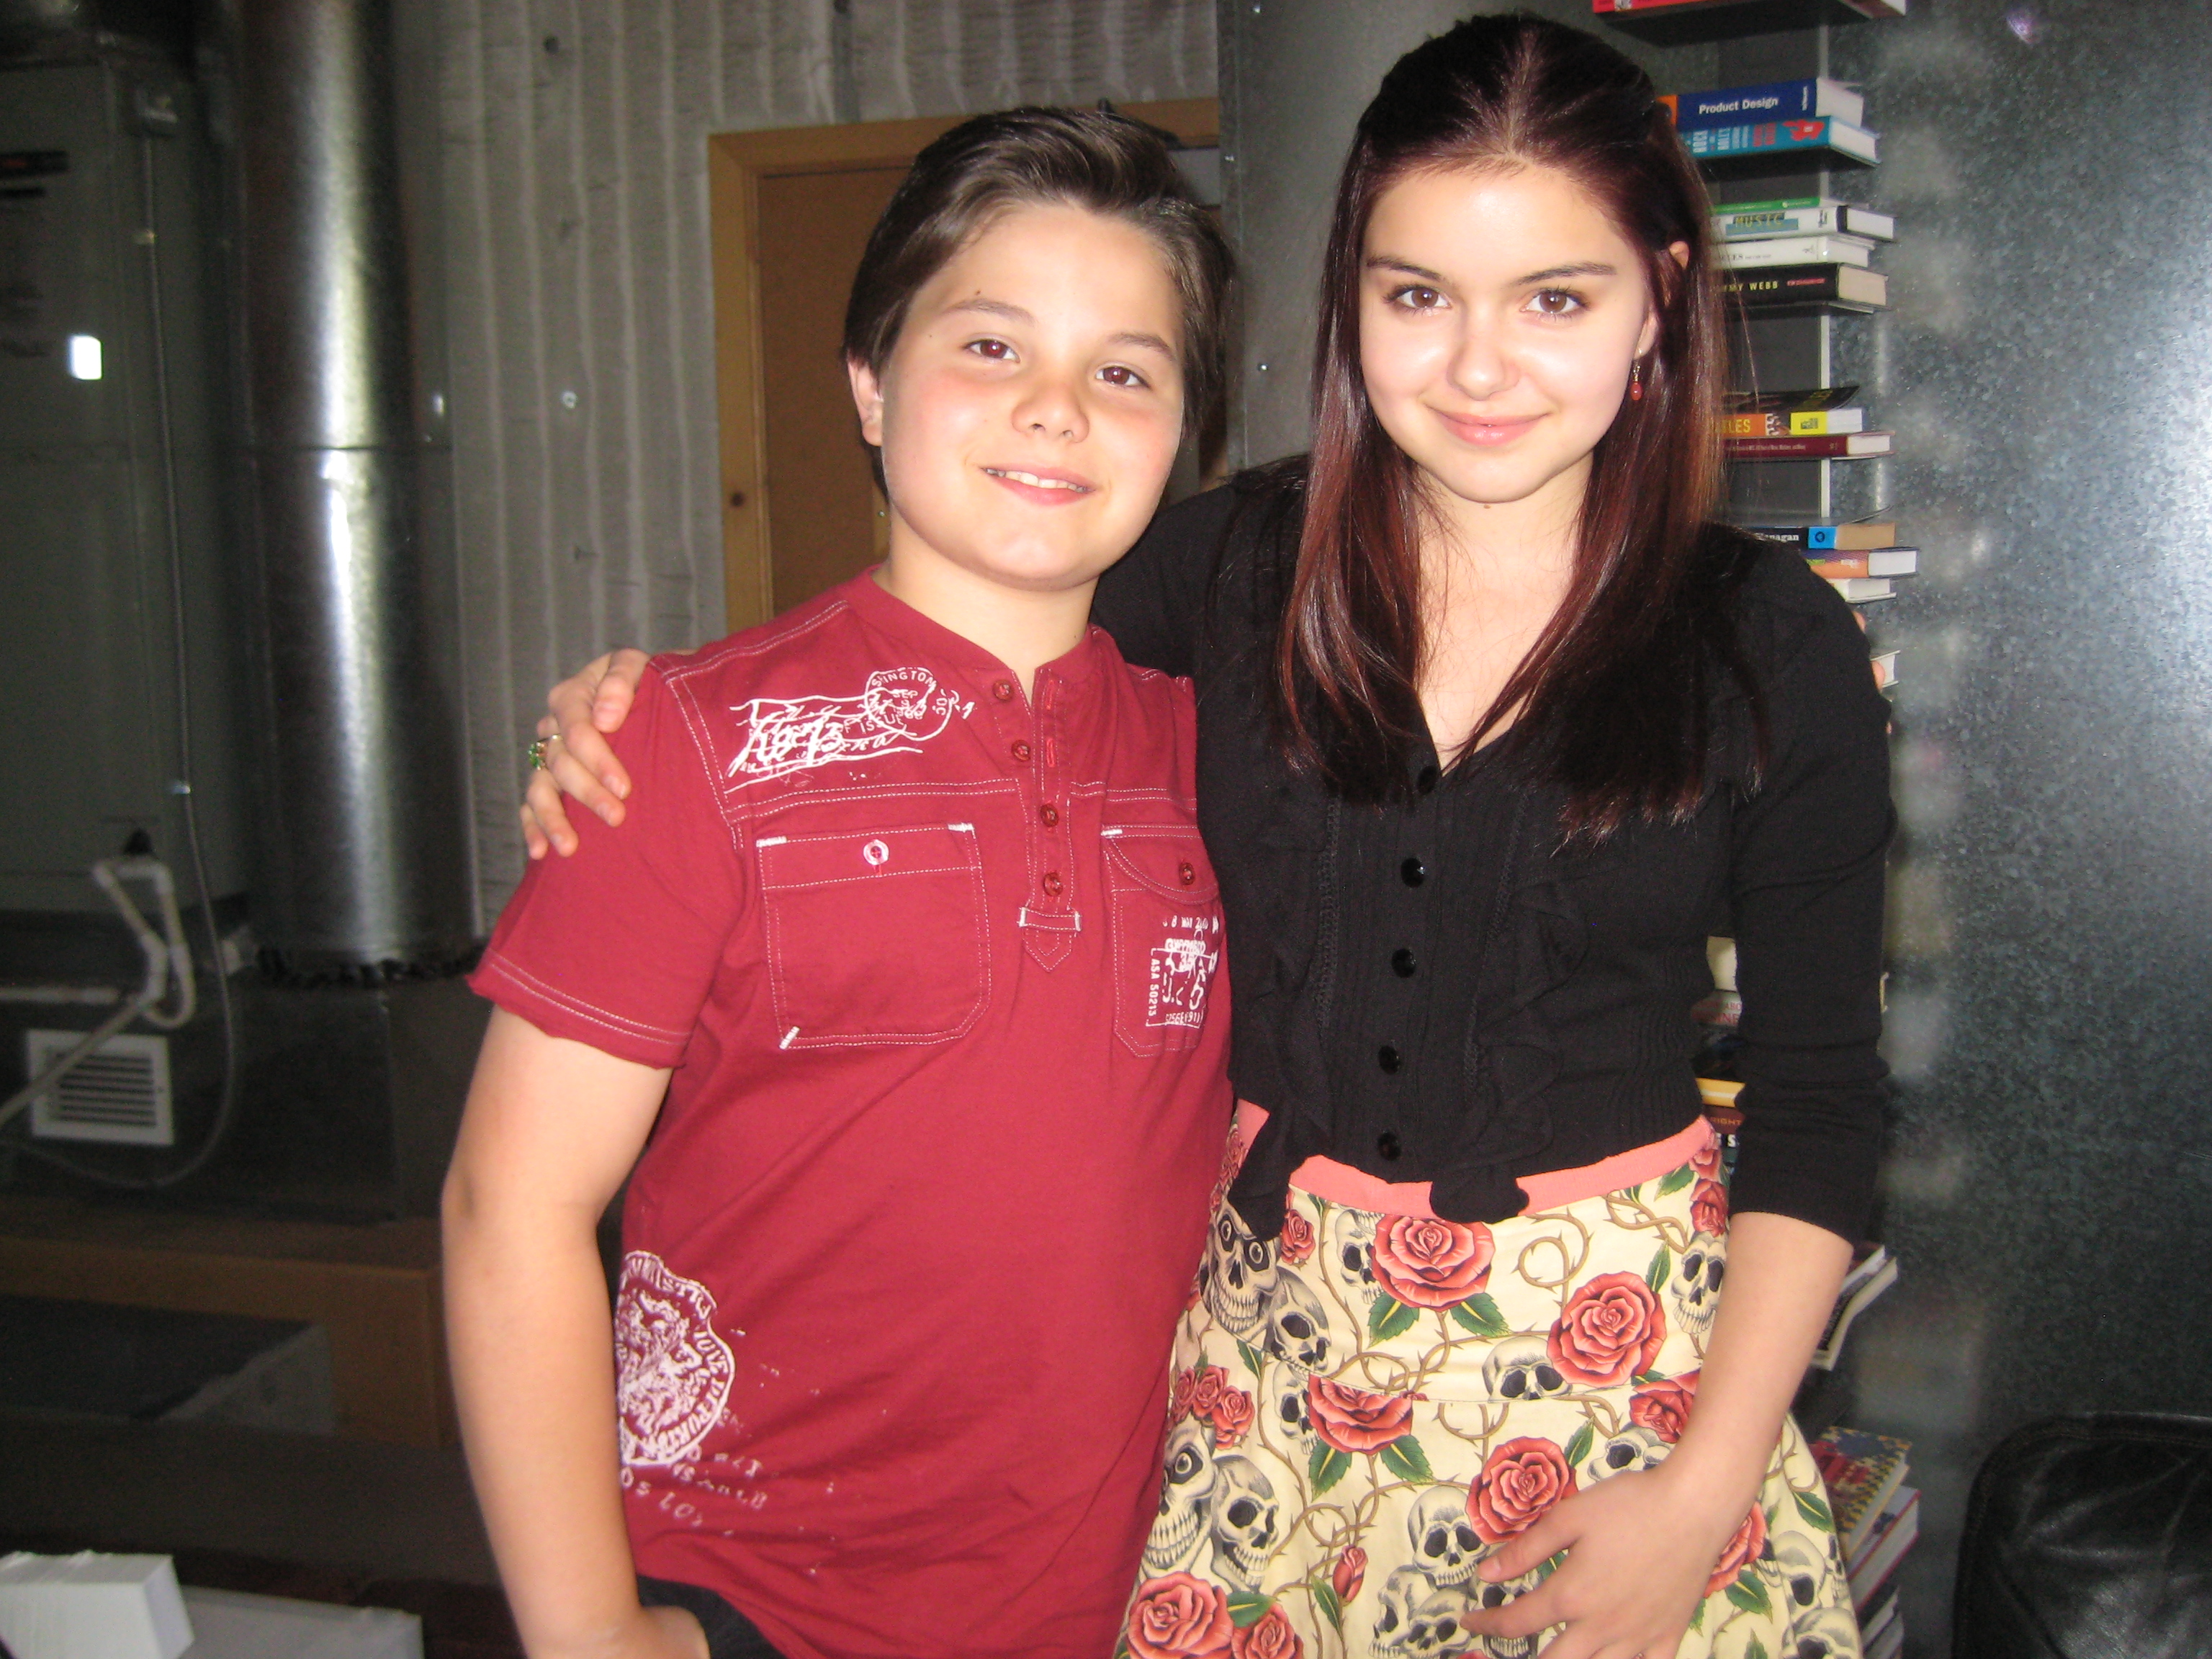 Zach Callison and Ariel Winters just out ot the studio where they recorded the first episode of 